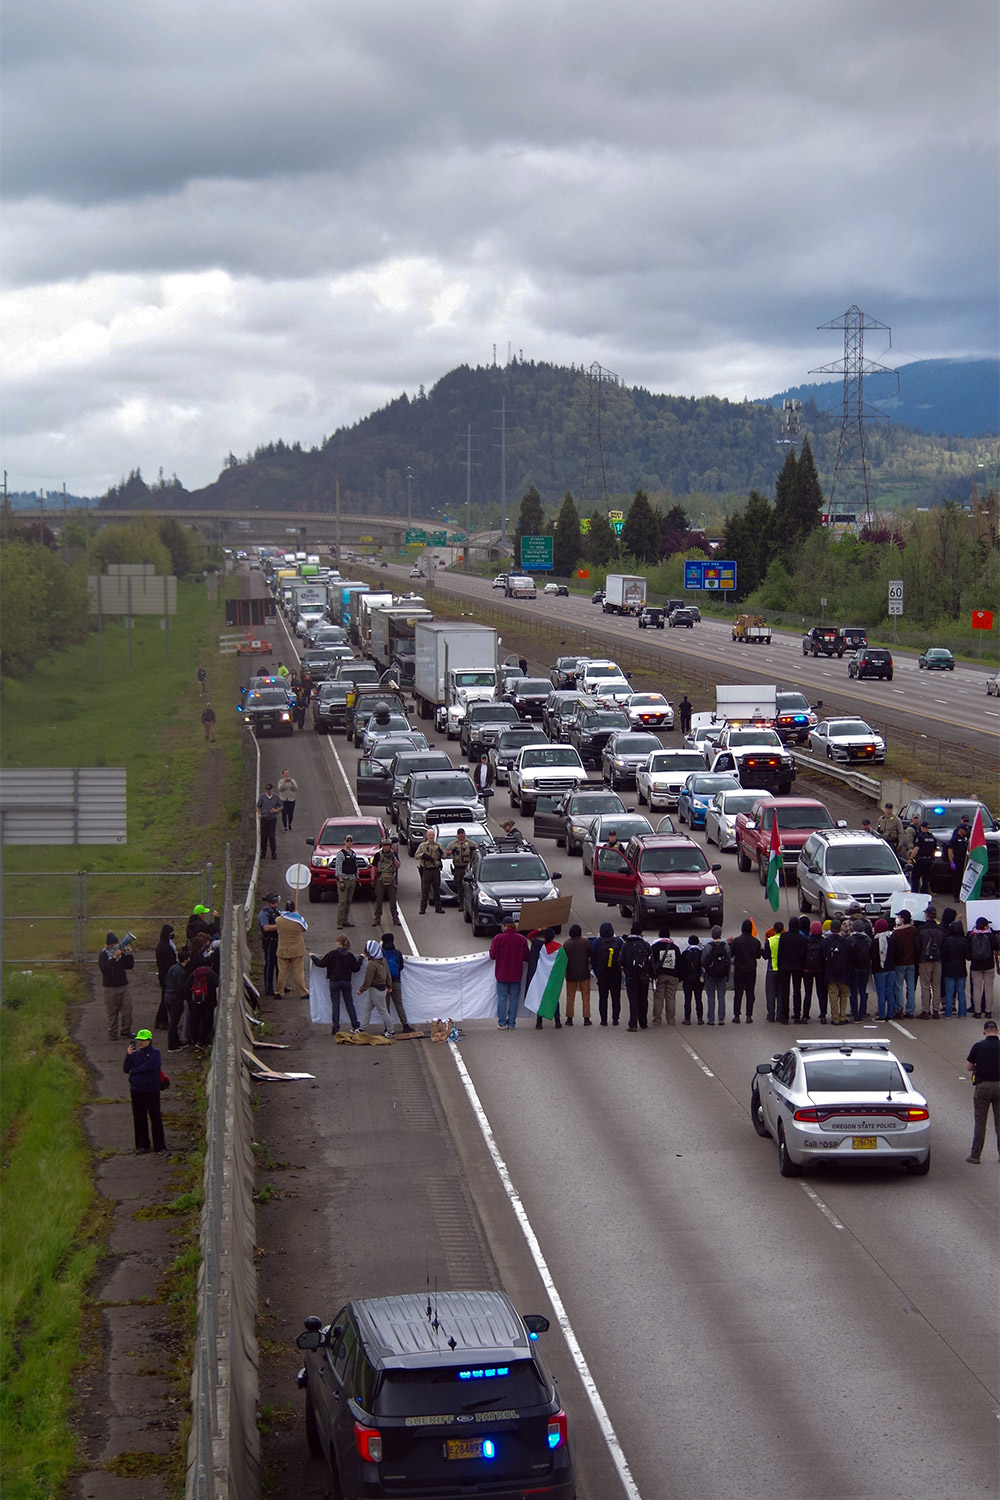 Protest Shuts Down I-5 South